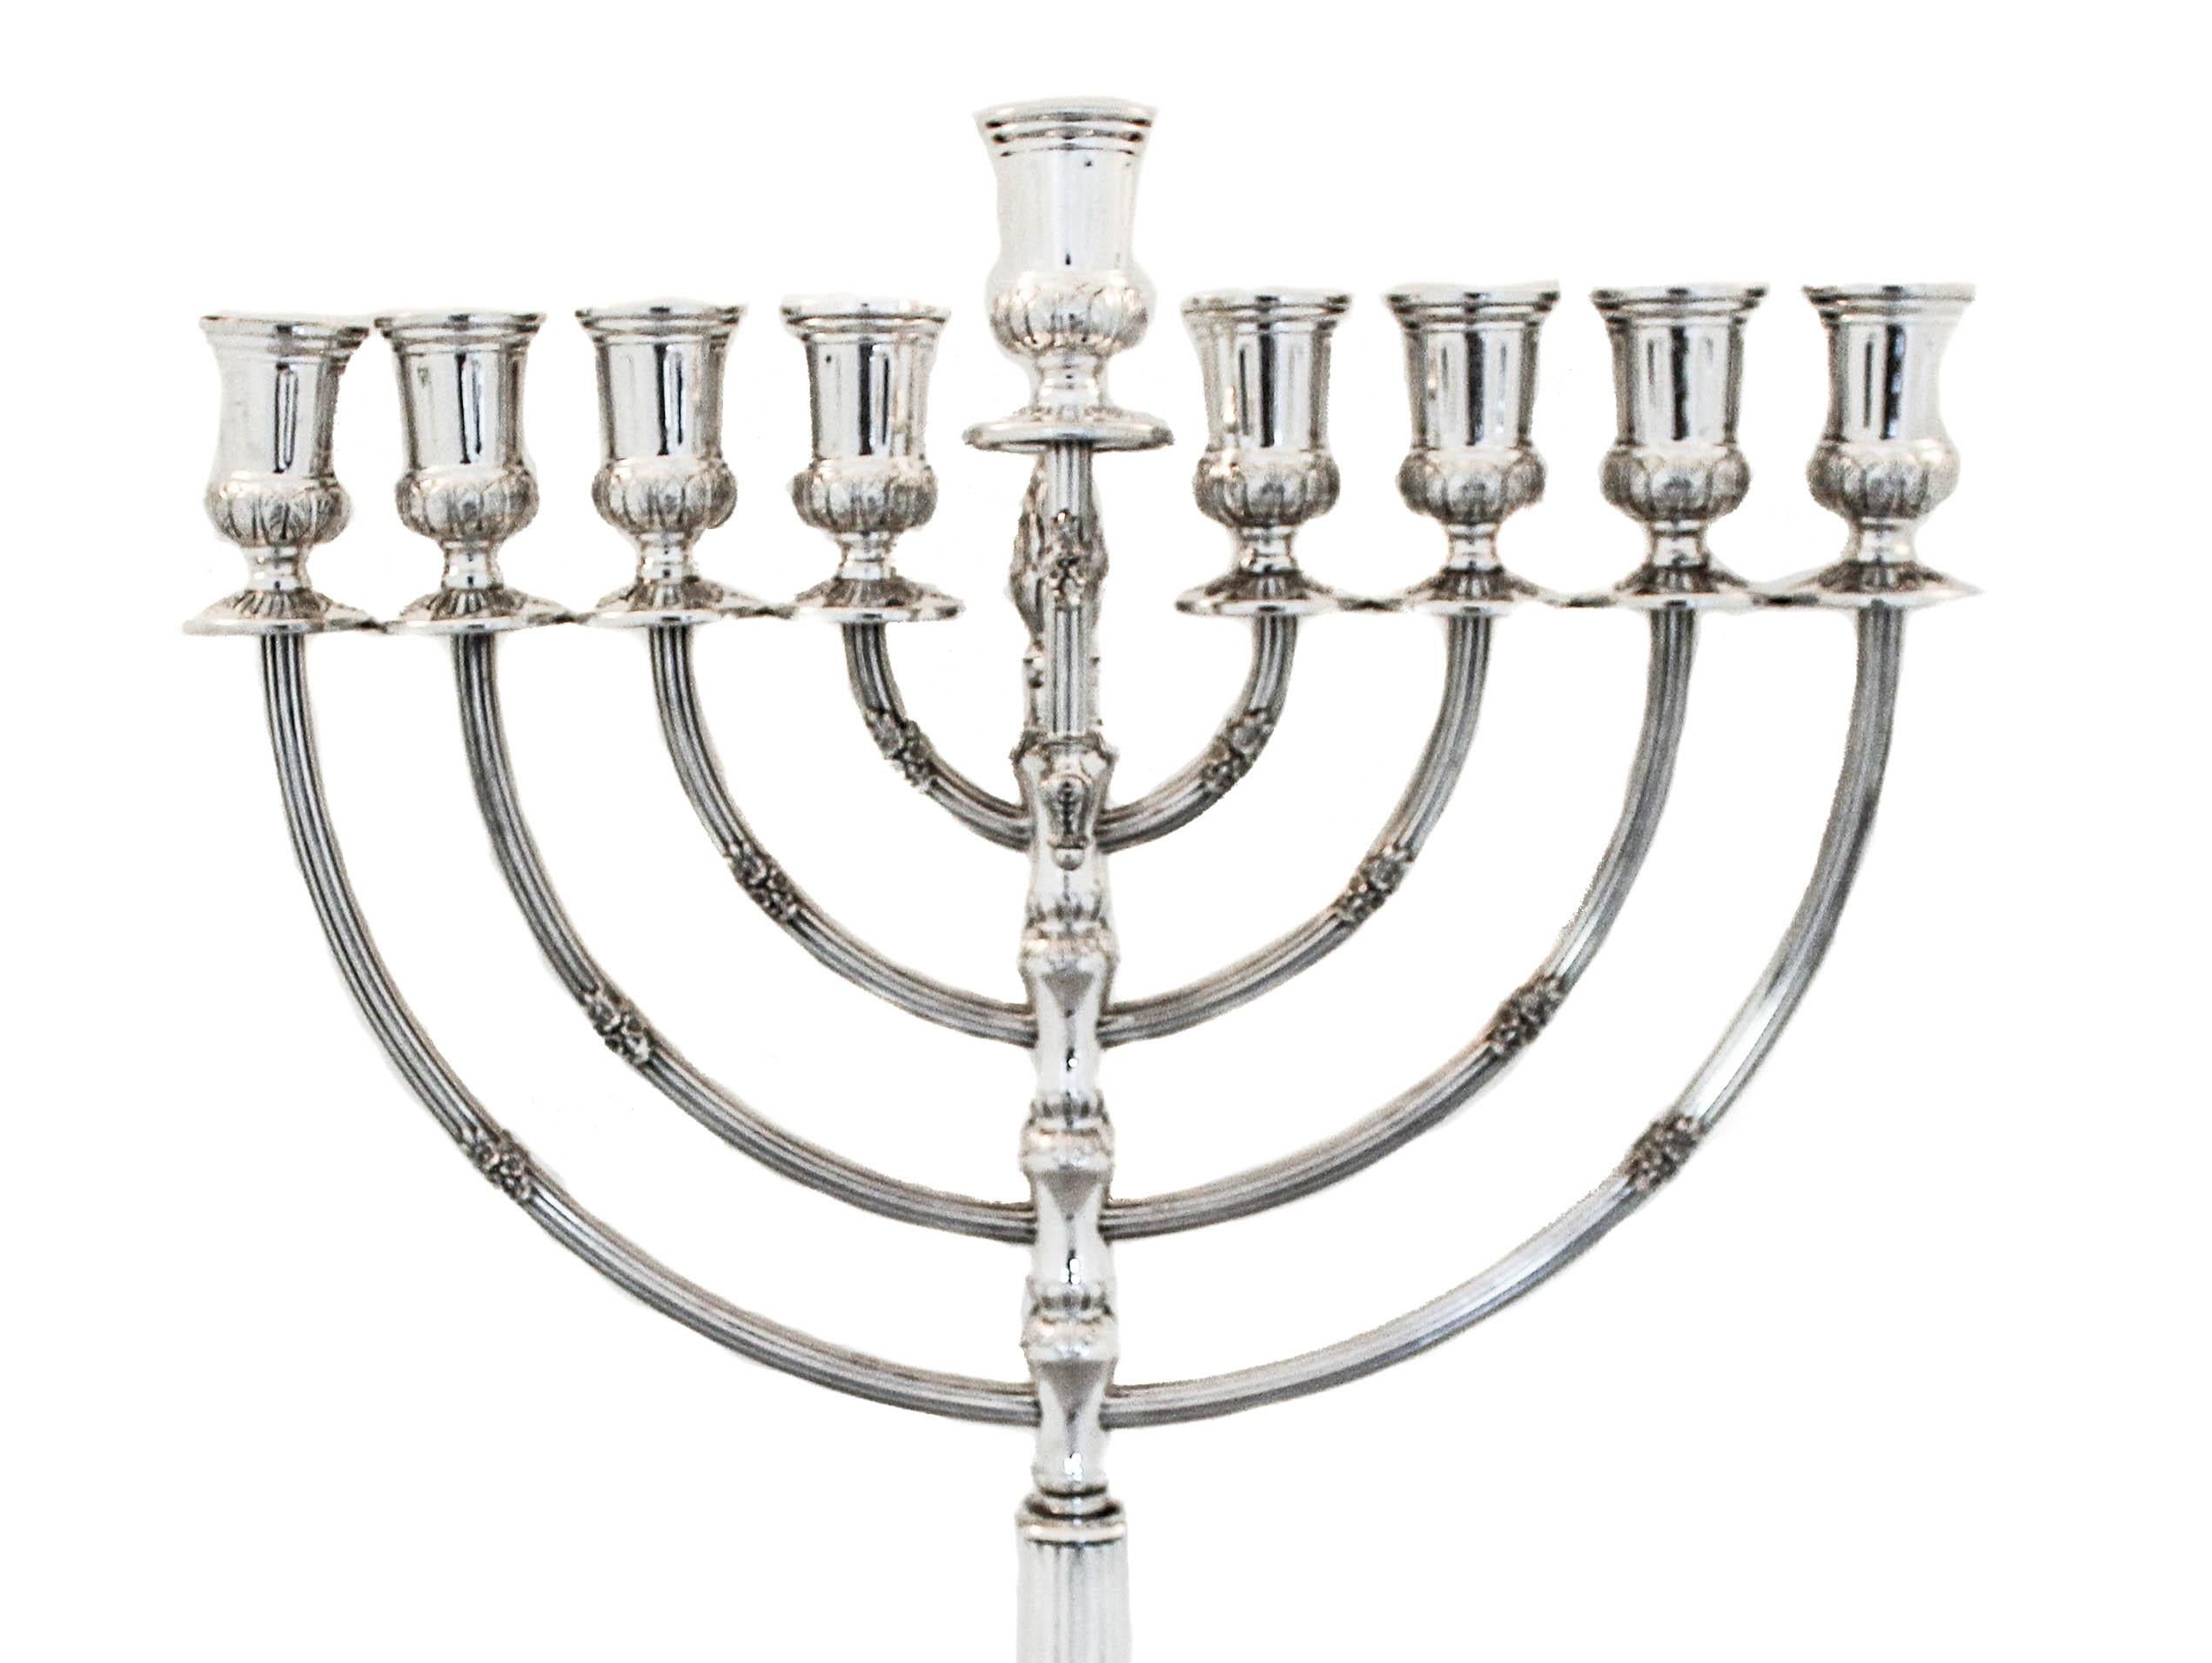 Just in time for Hanukkah we are happy to offer you this sterling silver menorah from Israel. It is regal and rich-looking. It has a square base and stands on four feet. There is a small floral motif on the branches along with ridges to give the